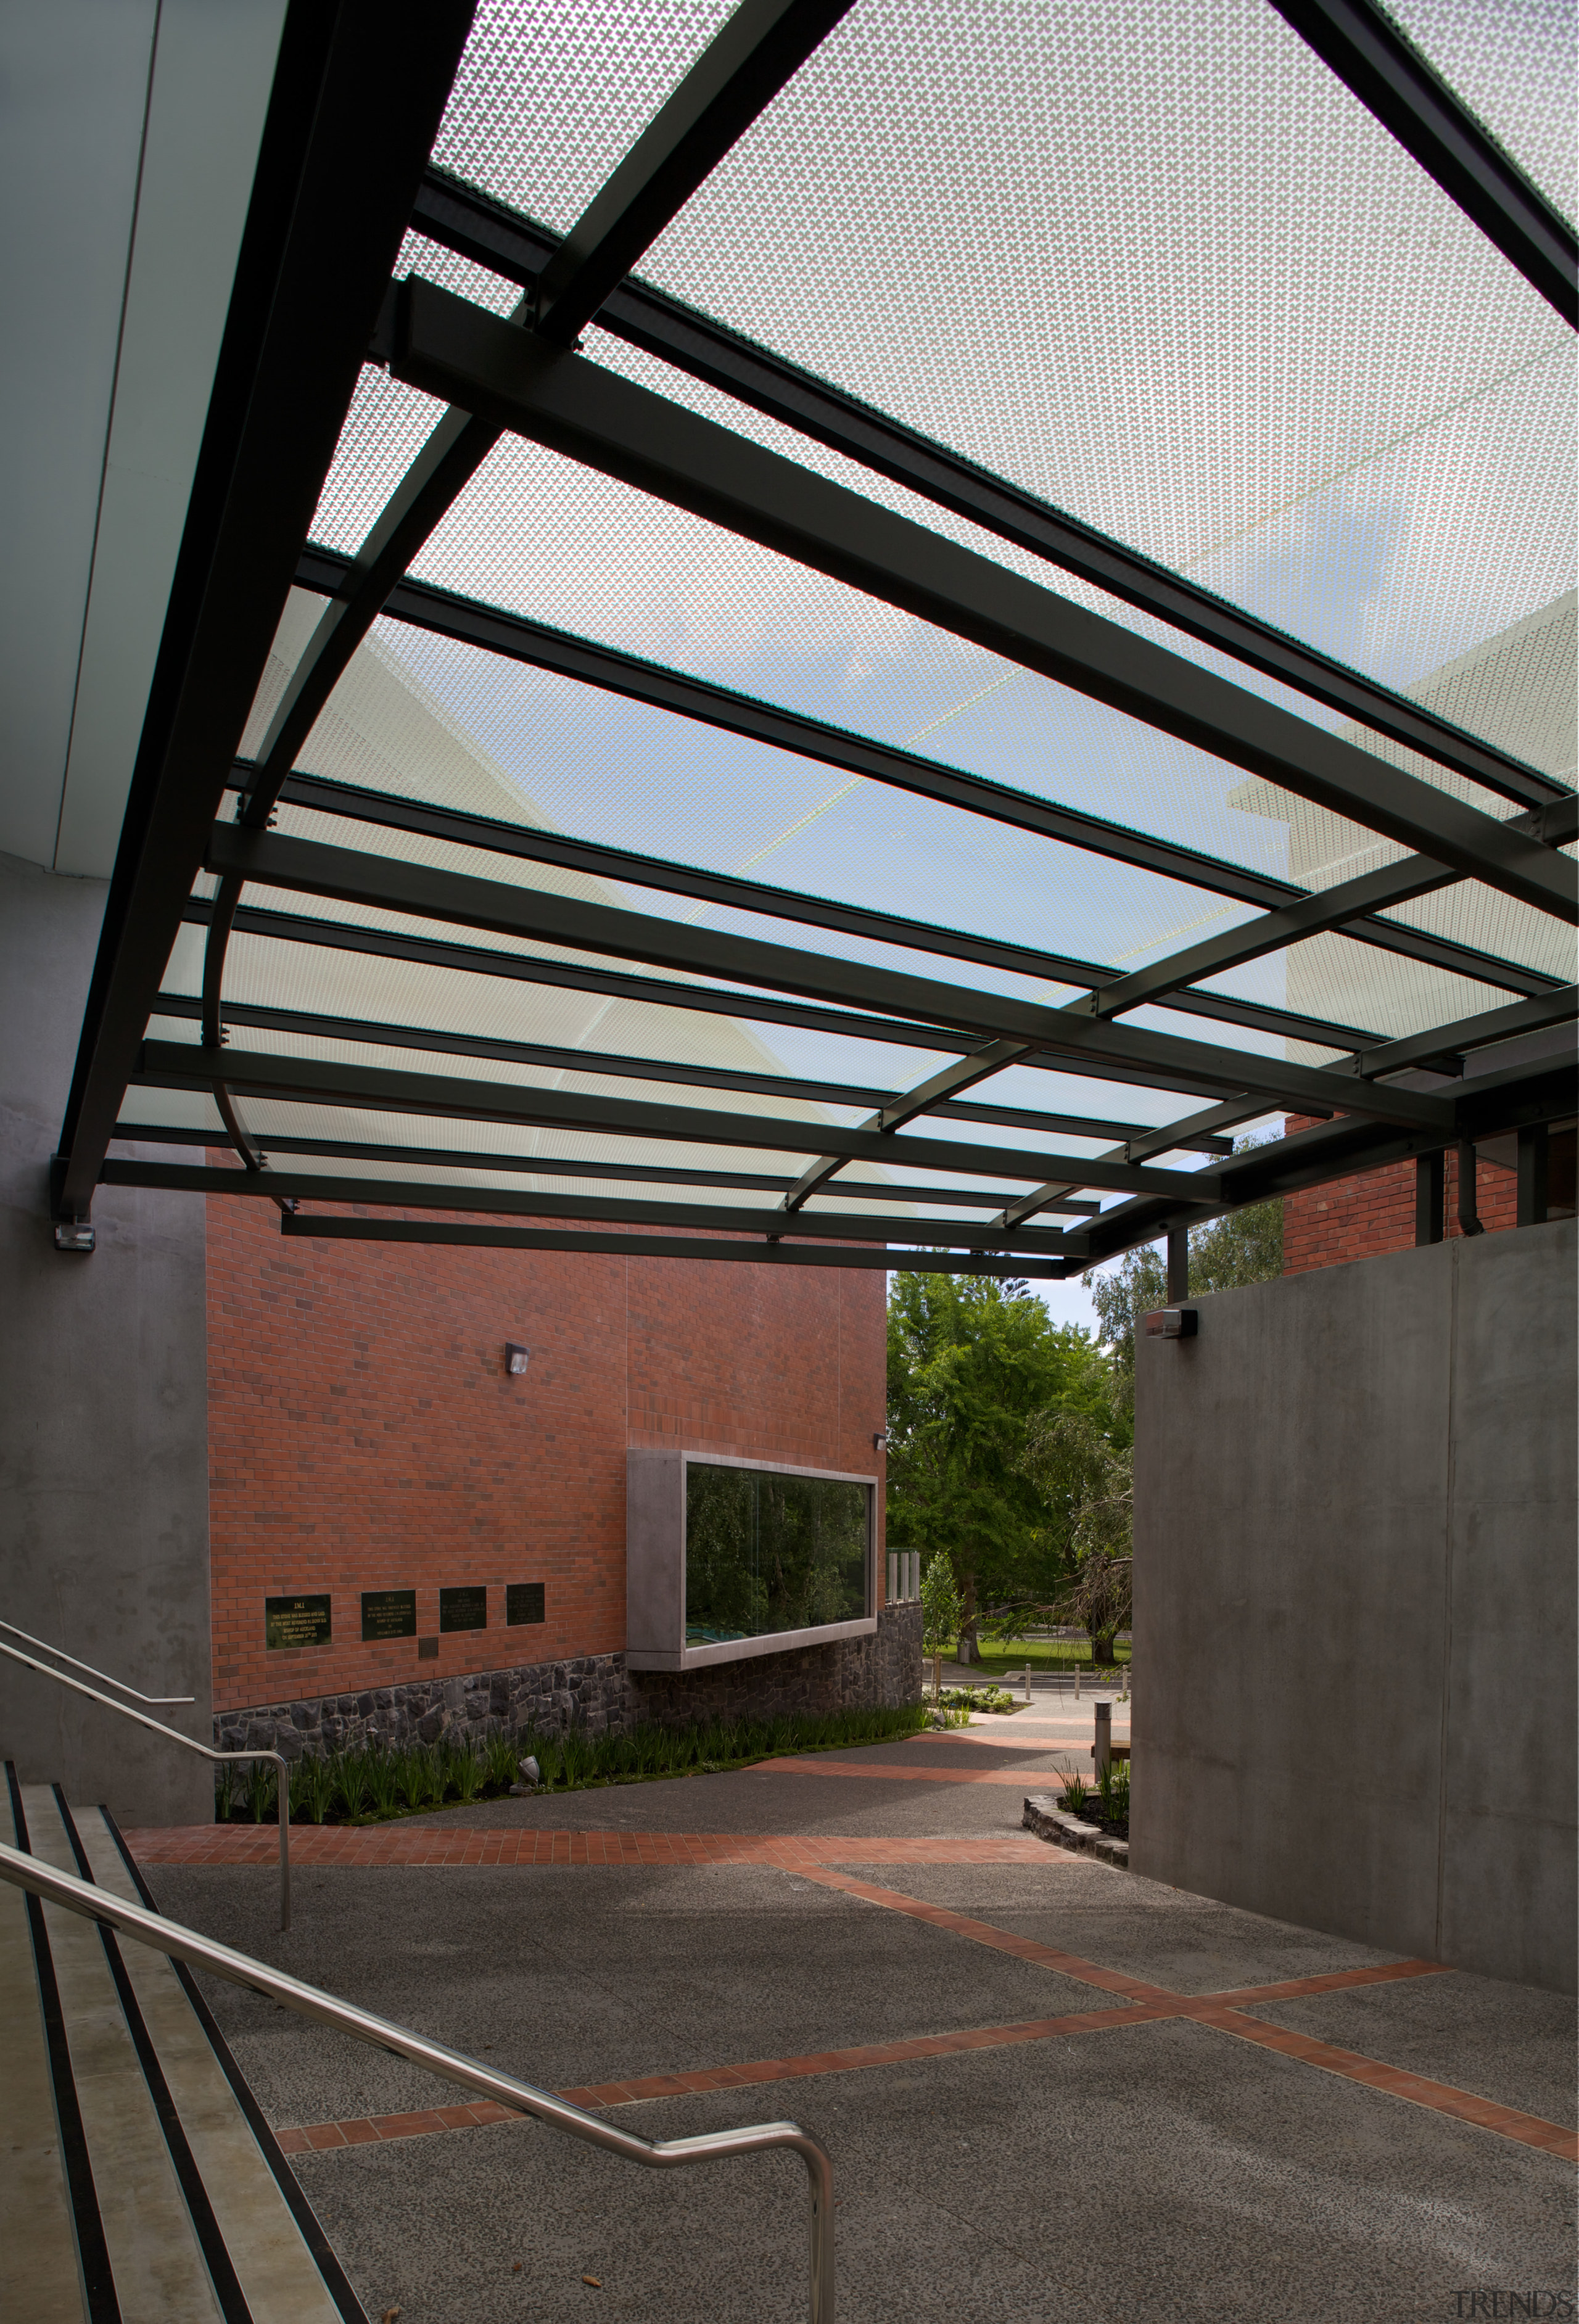 The building framework, protruding stage and attached canopy architecture, daylighting, roof, structure, black, gray